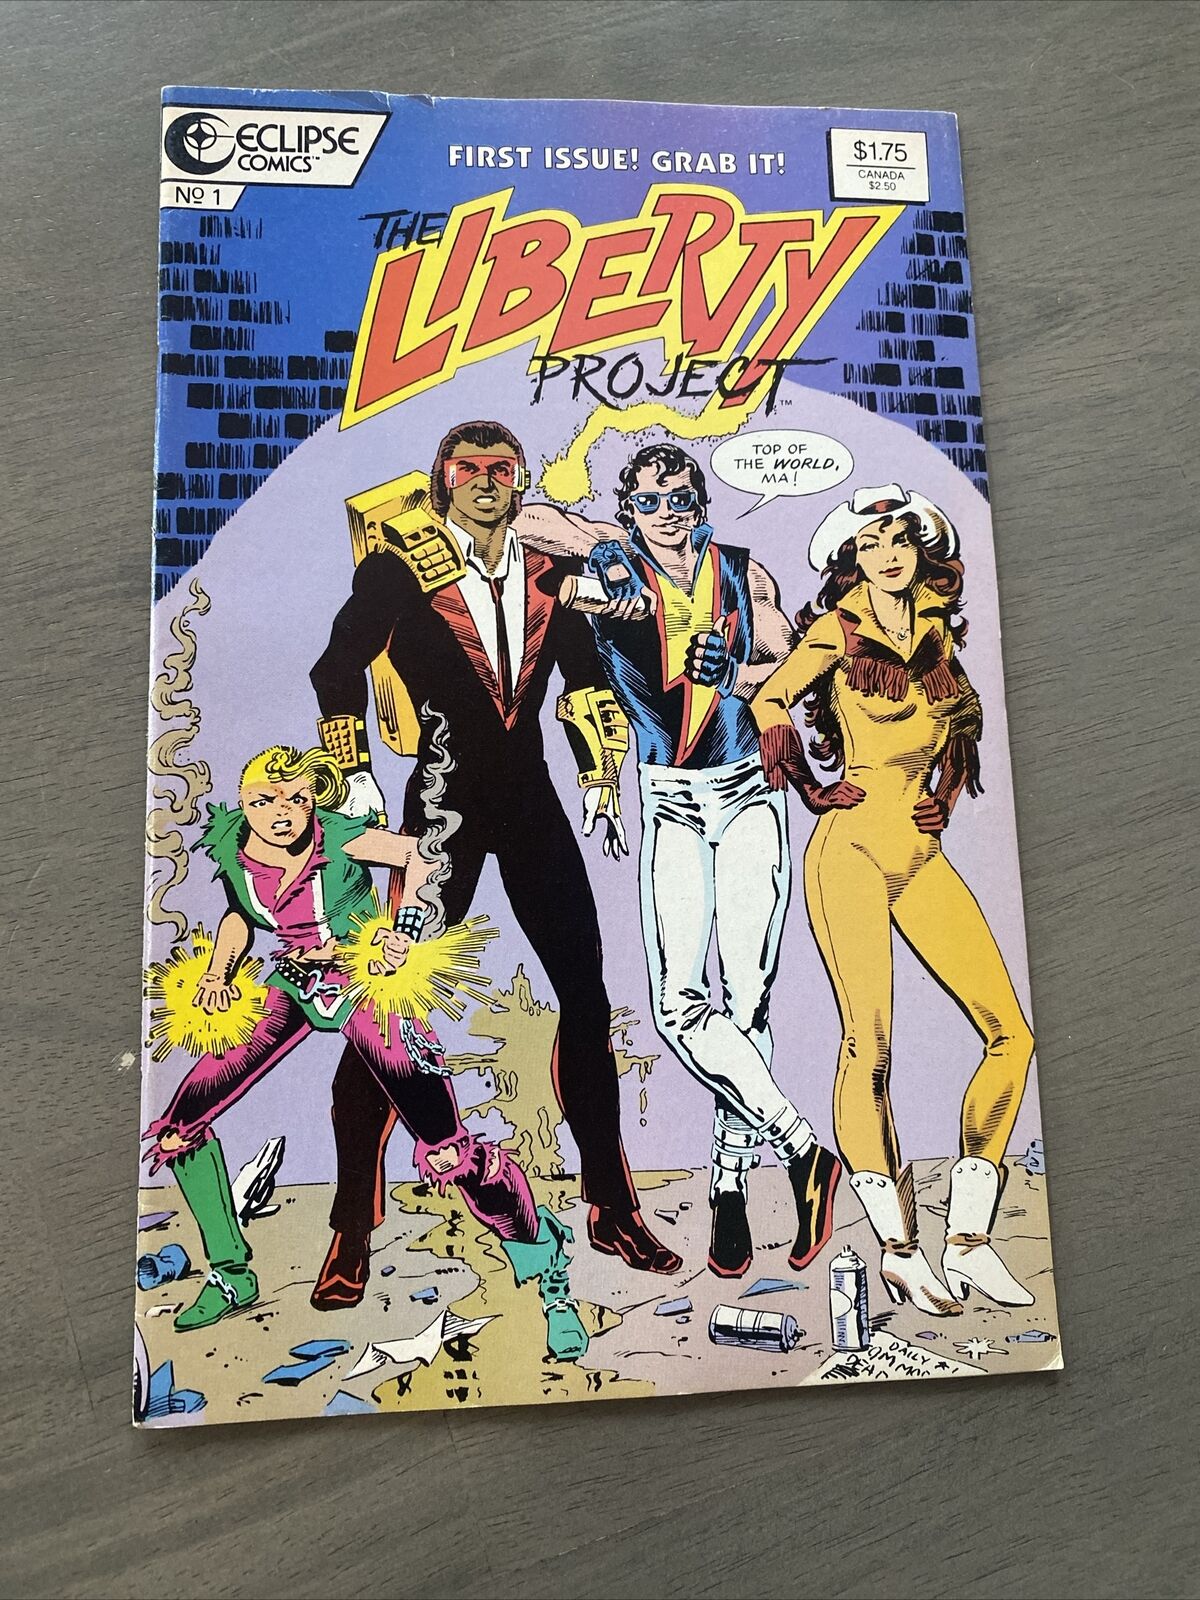 Vintage 1987 First Issue The Liberty Project #1 Eclipse Comic Book Indy Good